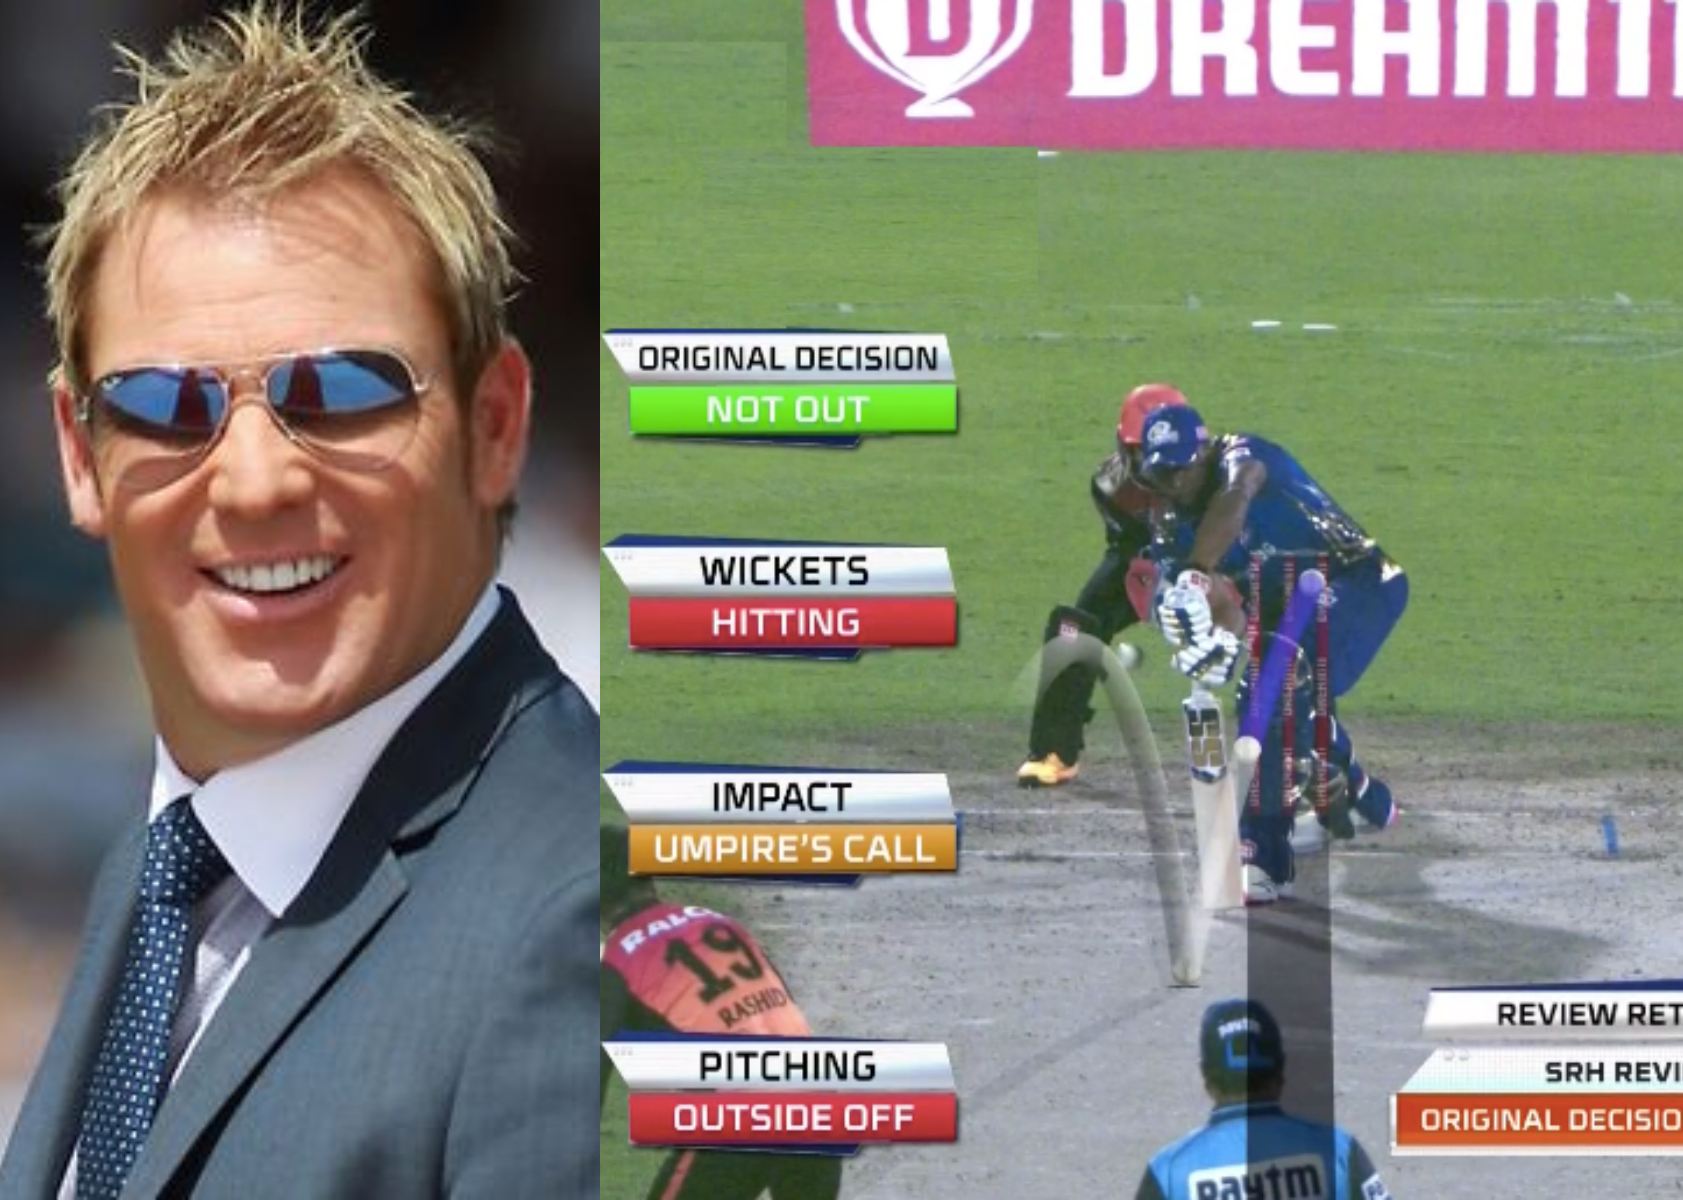 The contentious DRS call with which Warne has issues